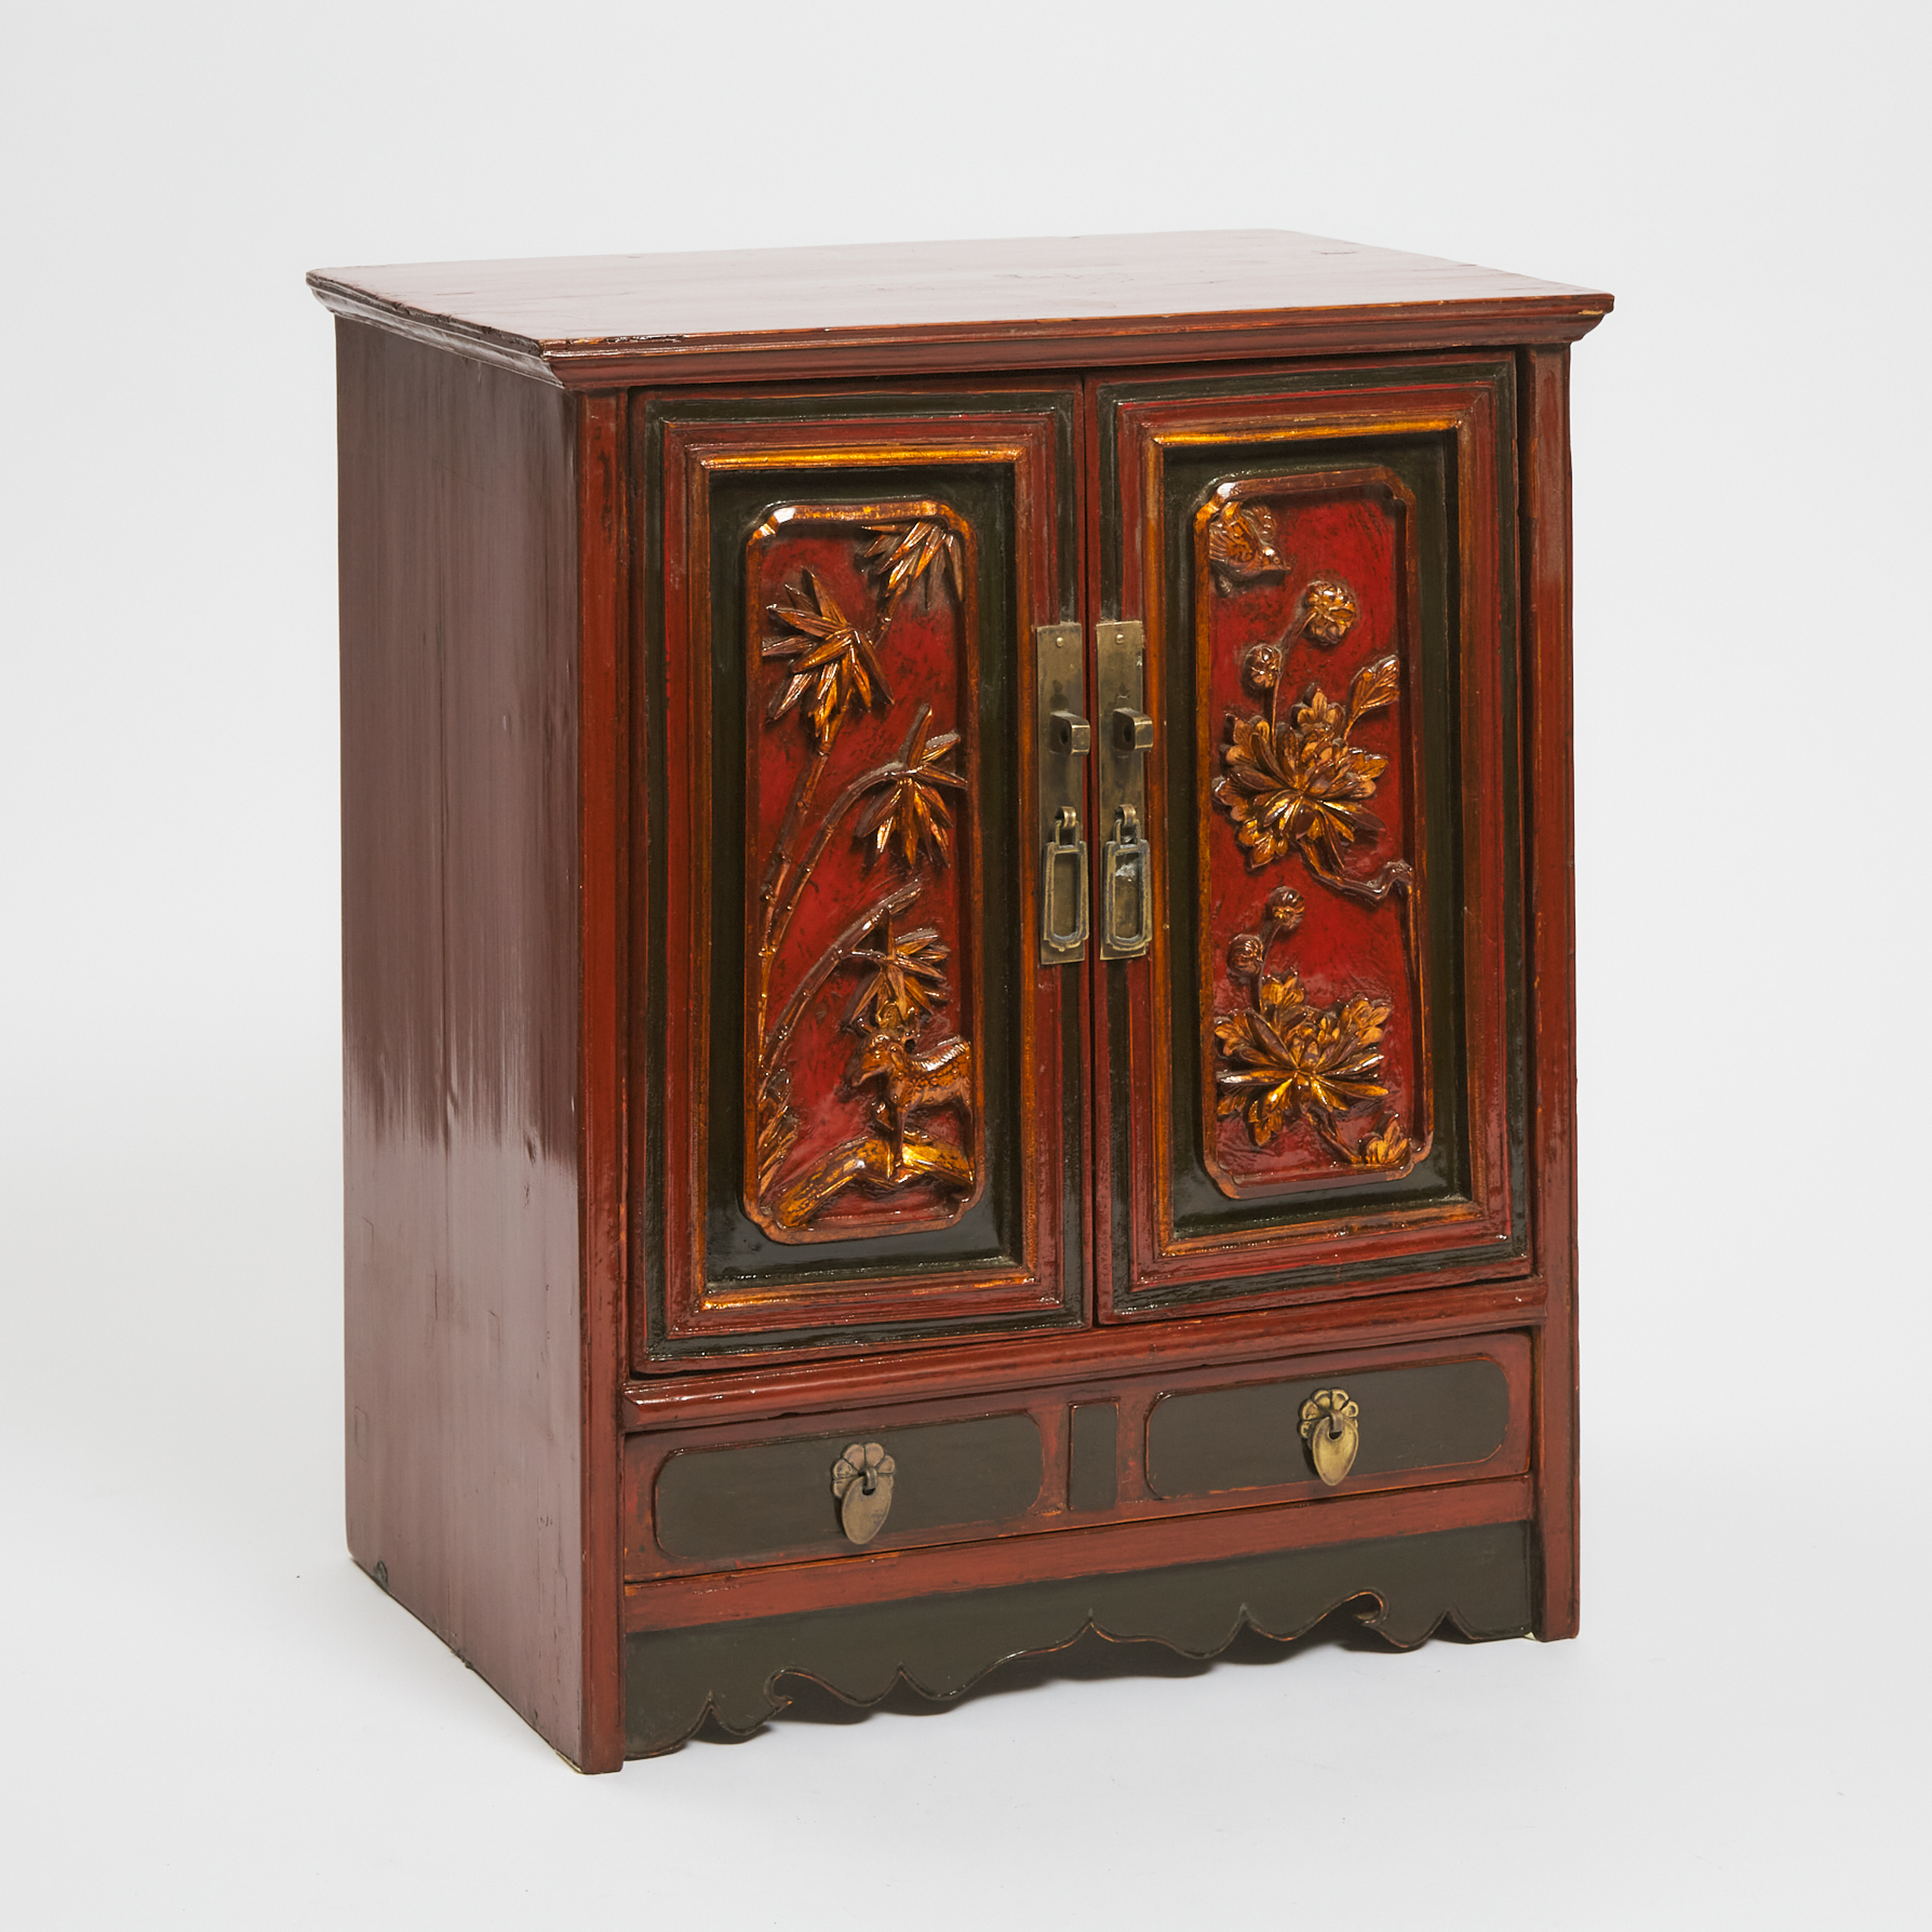 A Small Chinese Red Lacquered Cabinet,